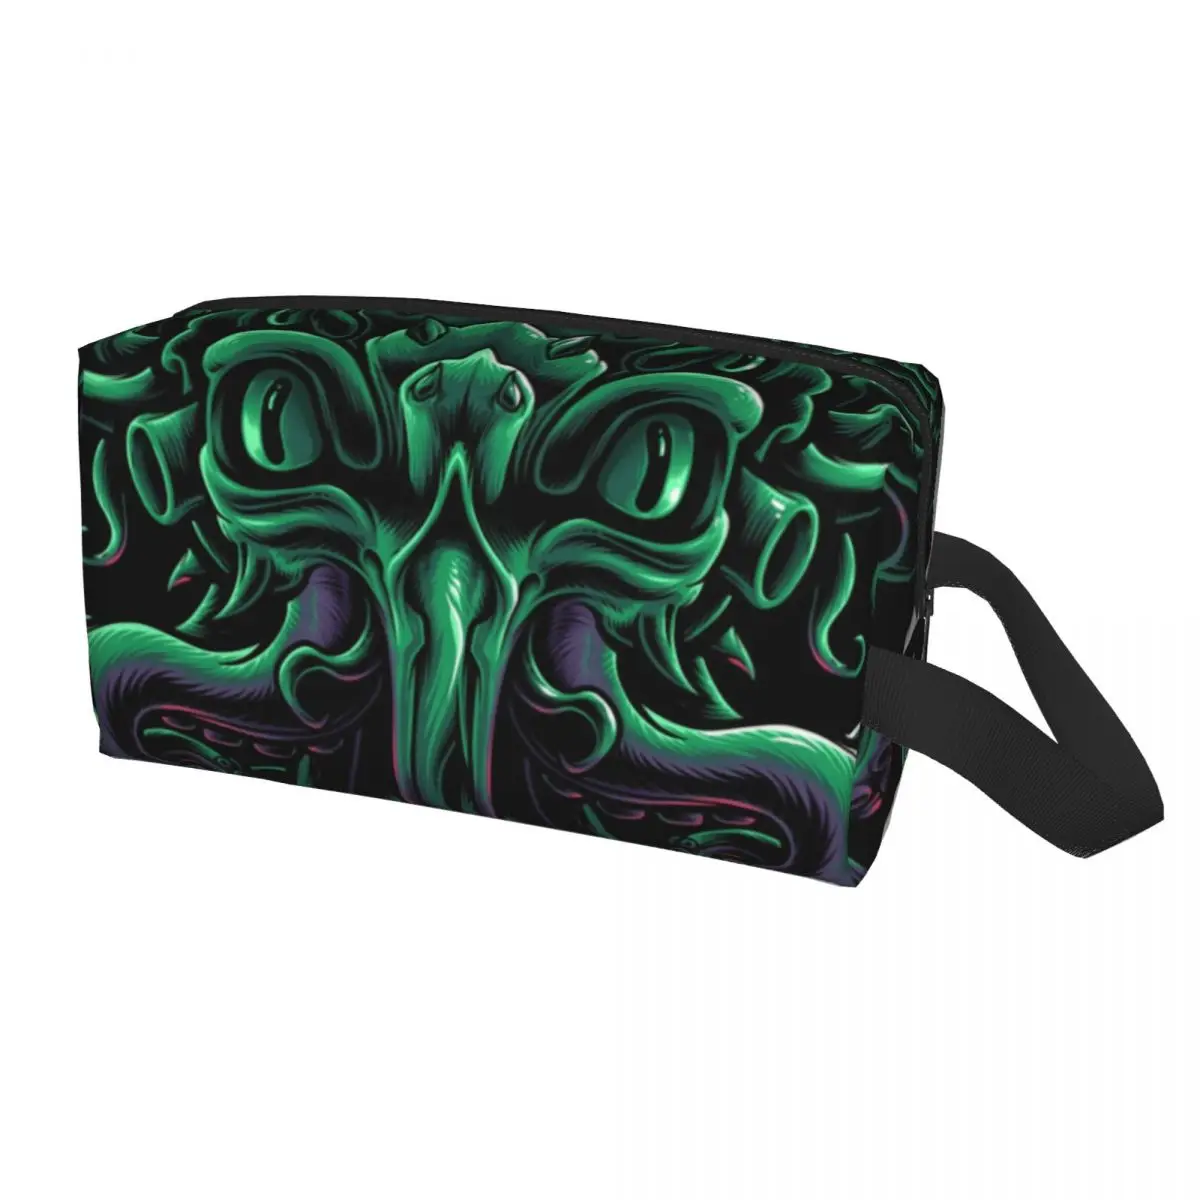 

Cool Lovecraft Cthulhu Travel Toiletry Bag Women The Old God of R'lyeh Graphic Cosmetic Makeup Organizer Beauty Storage Dopp Kit